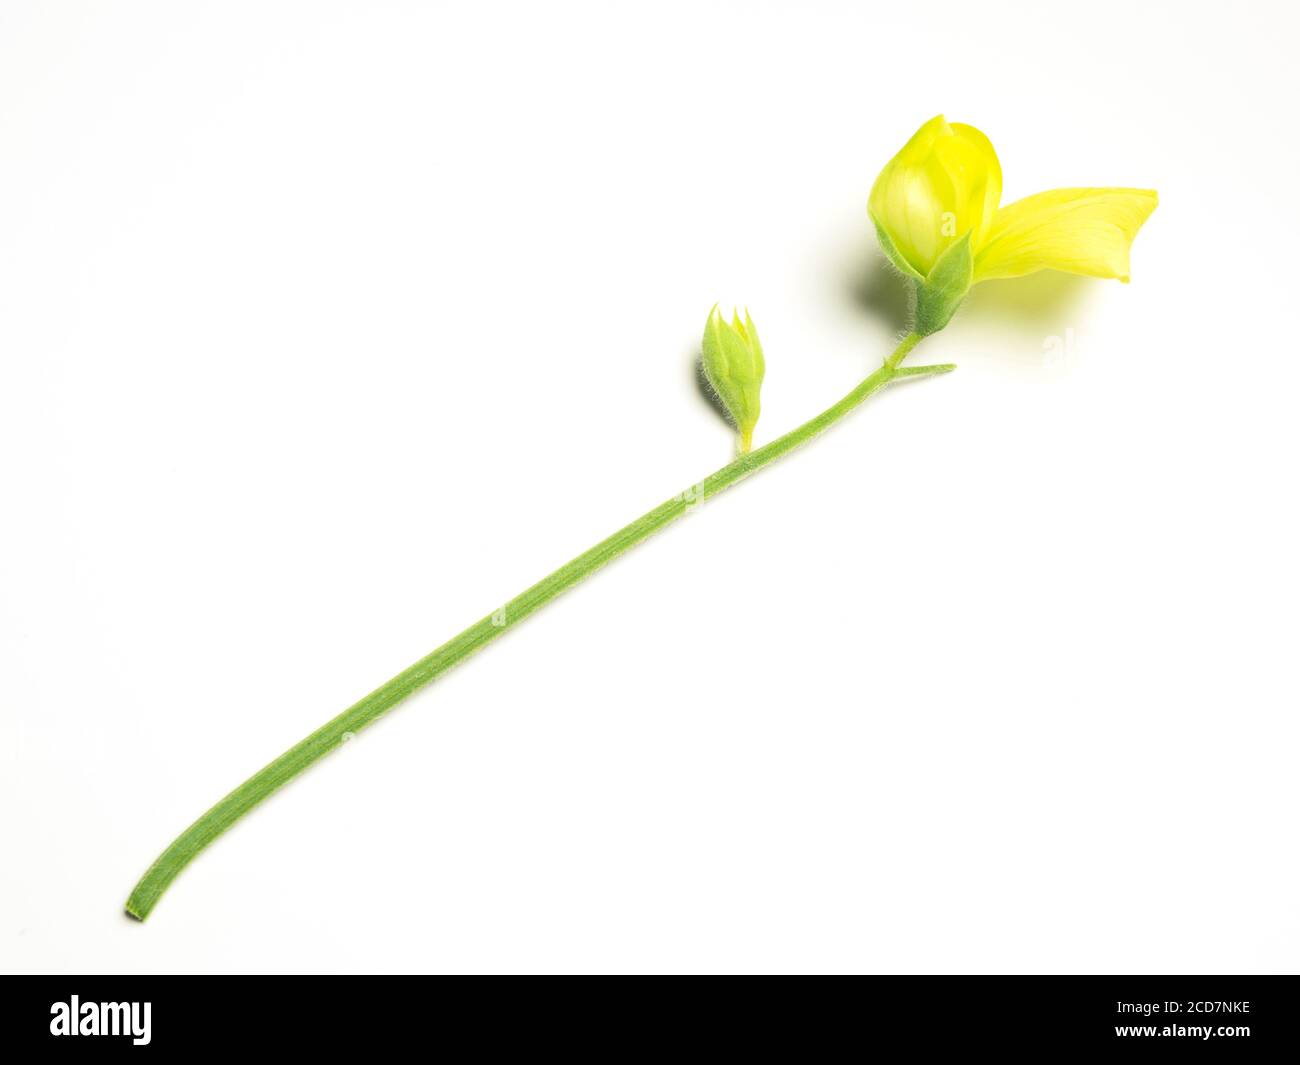 Lathyrus chloranthus yellow sweet pea flower isolated on a white background with copy space Stock Photo